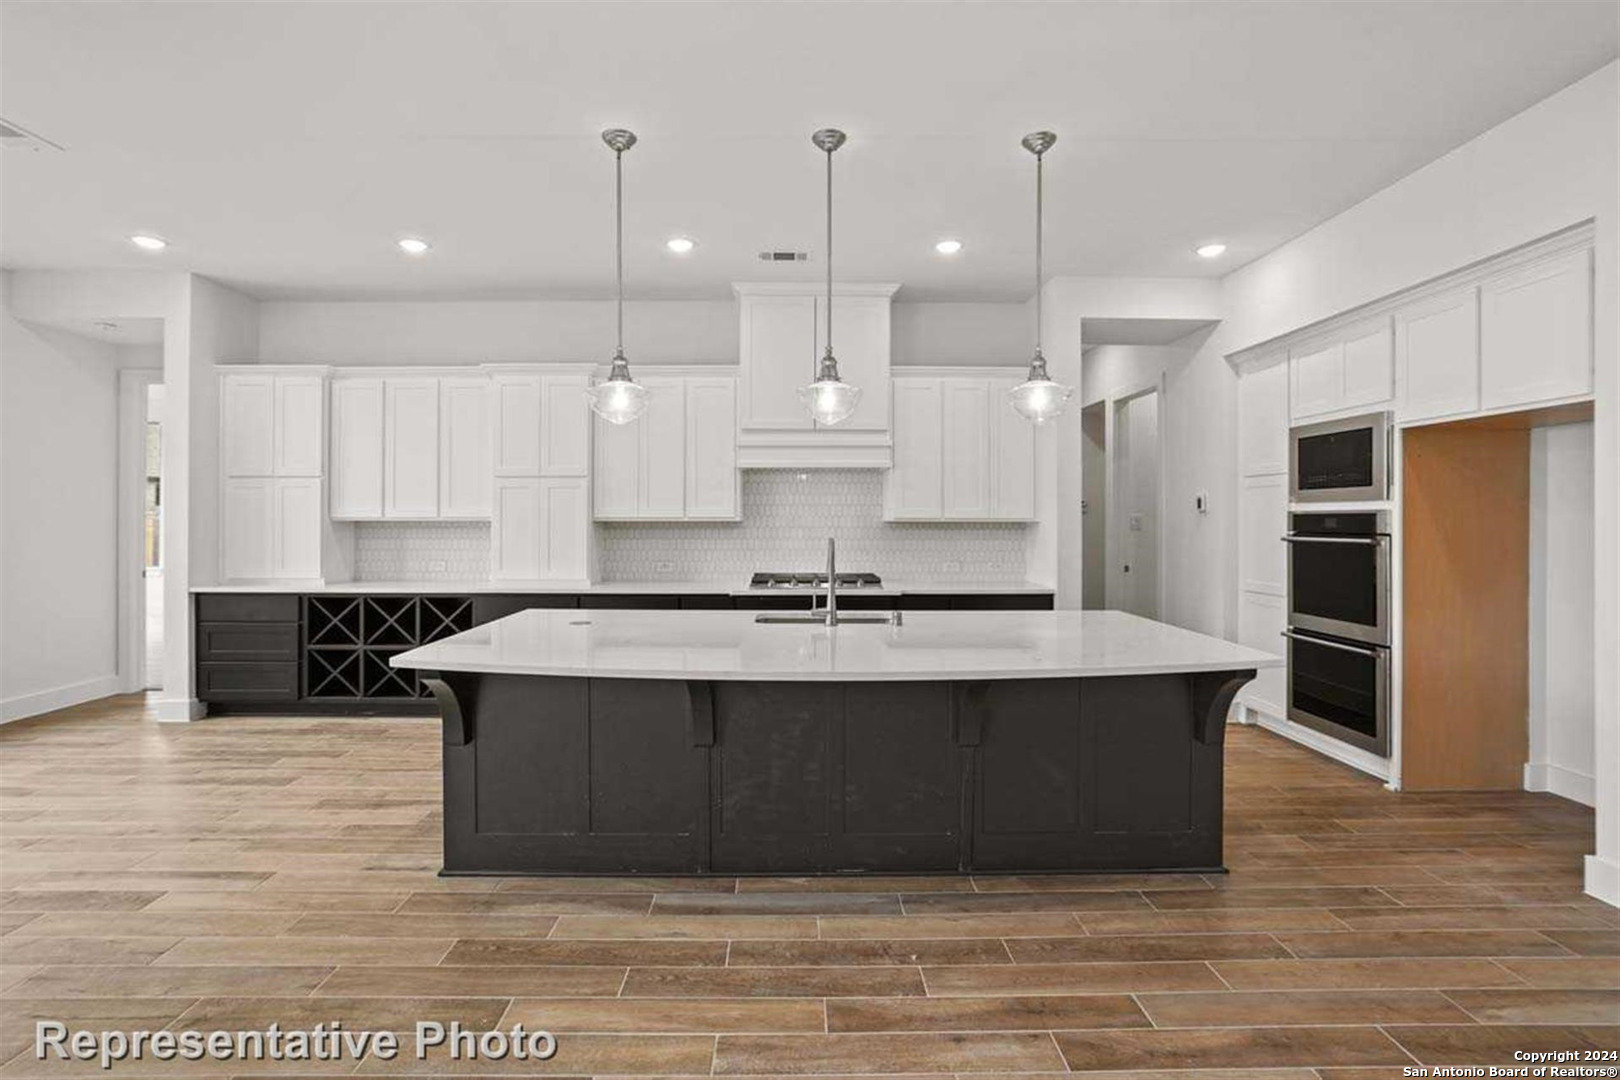 a large kitchen with kitchen island a sink stainless steel appliances and a counter space